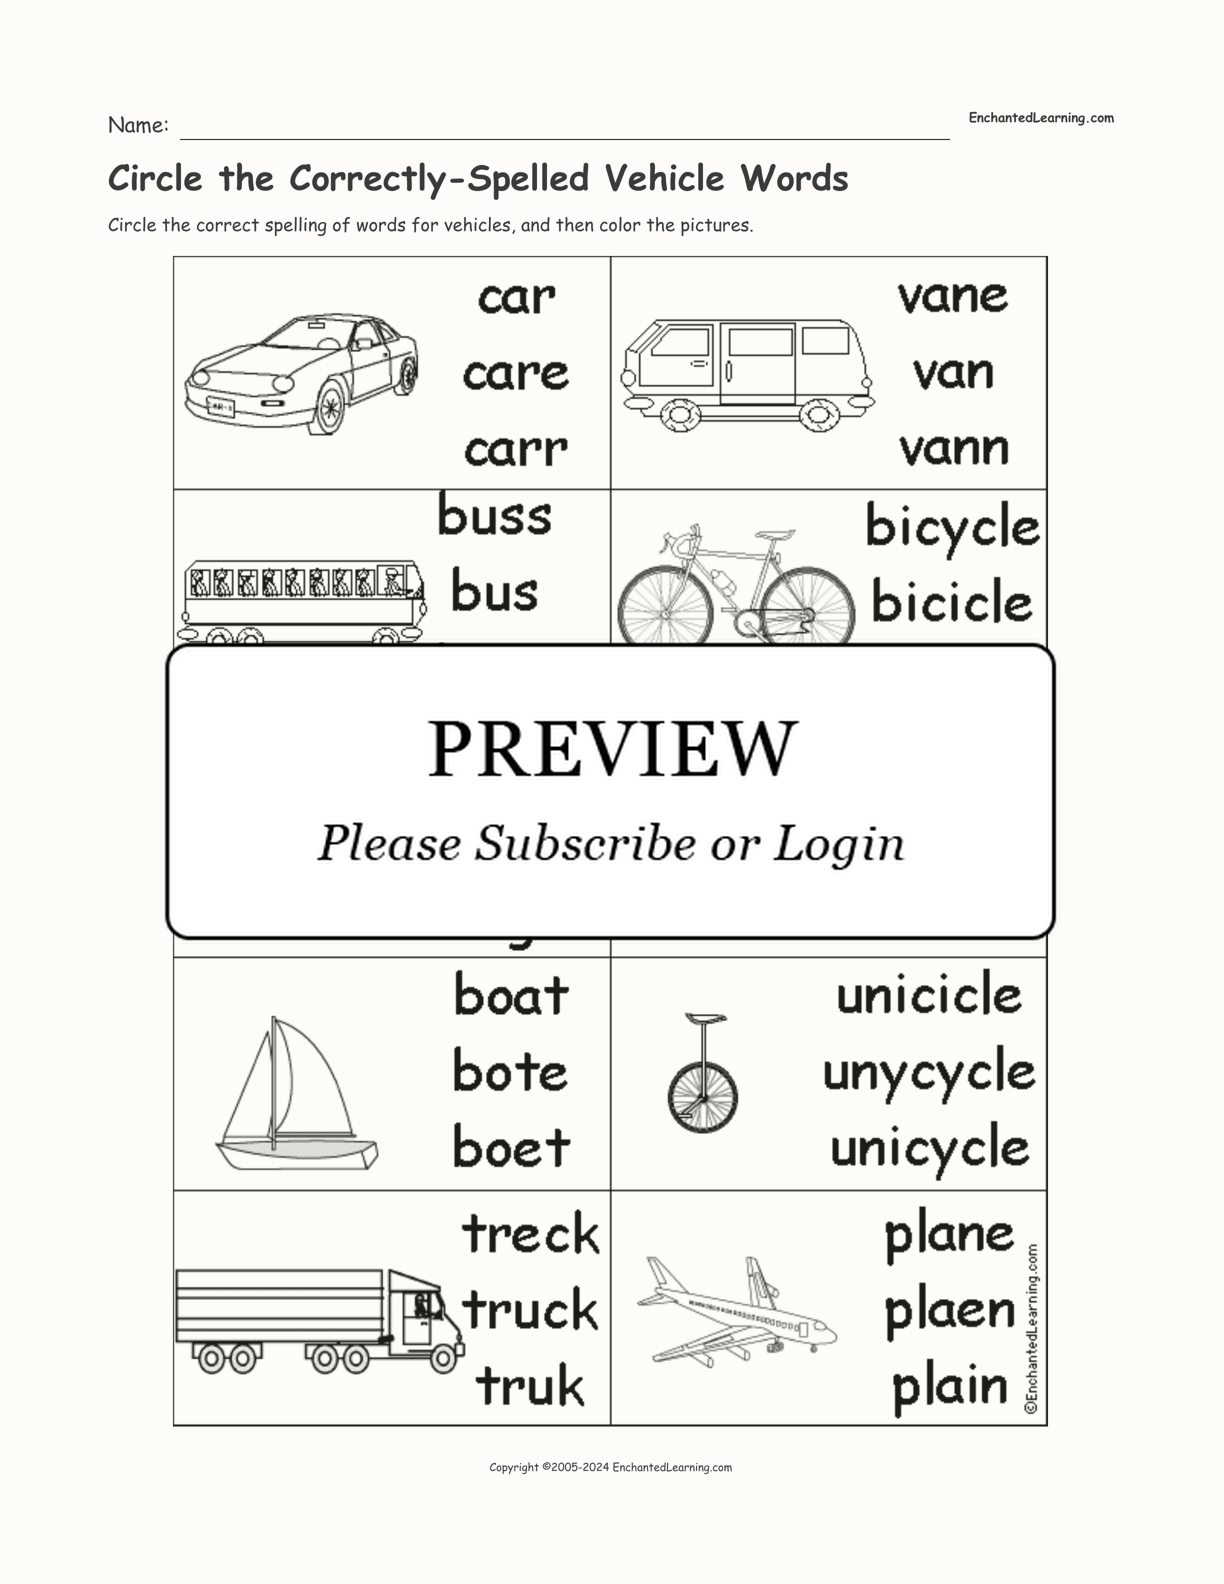 Circle the Correctly-Spelled Vehicle Words interactive worksheet page 1